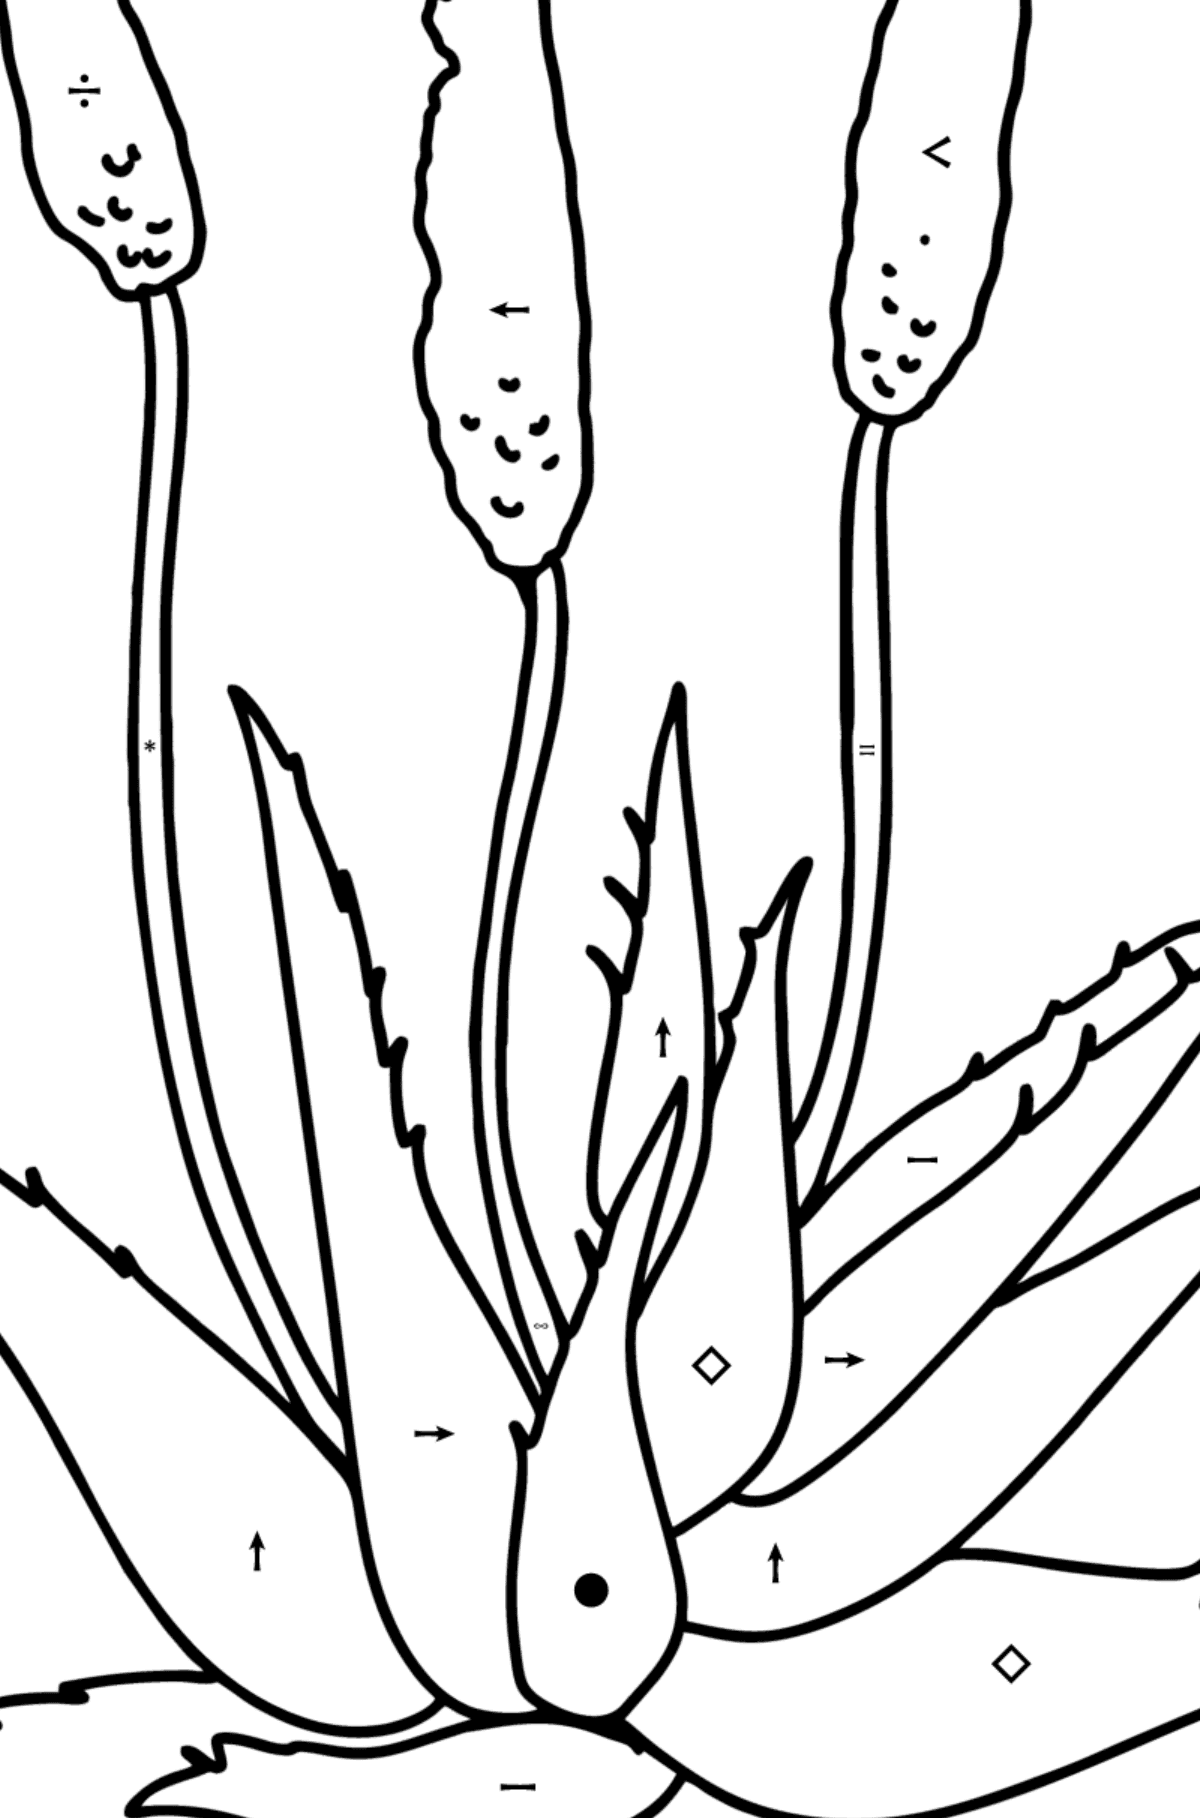 Aloe coloring page - Coloring by Symbols for Kids